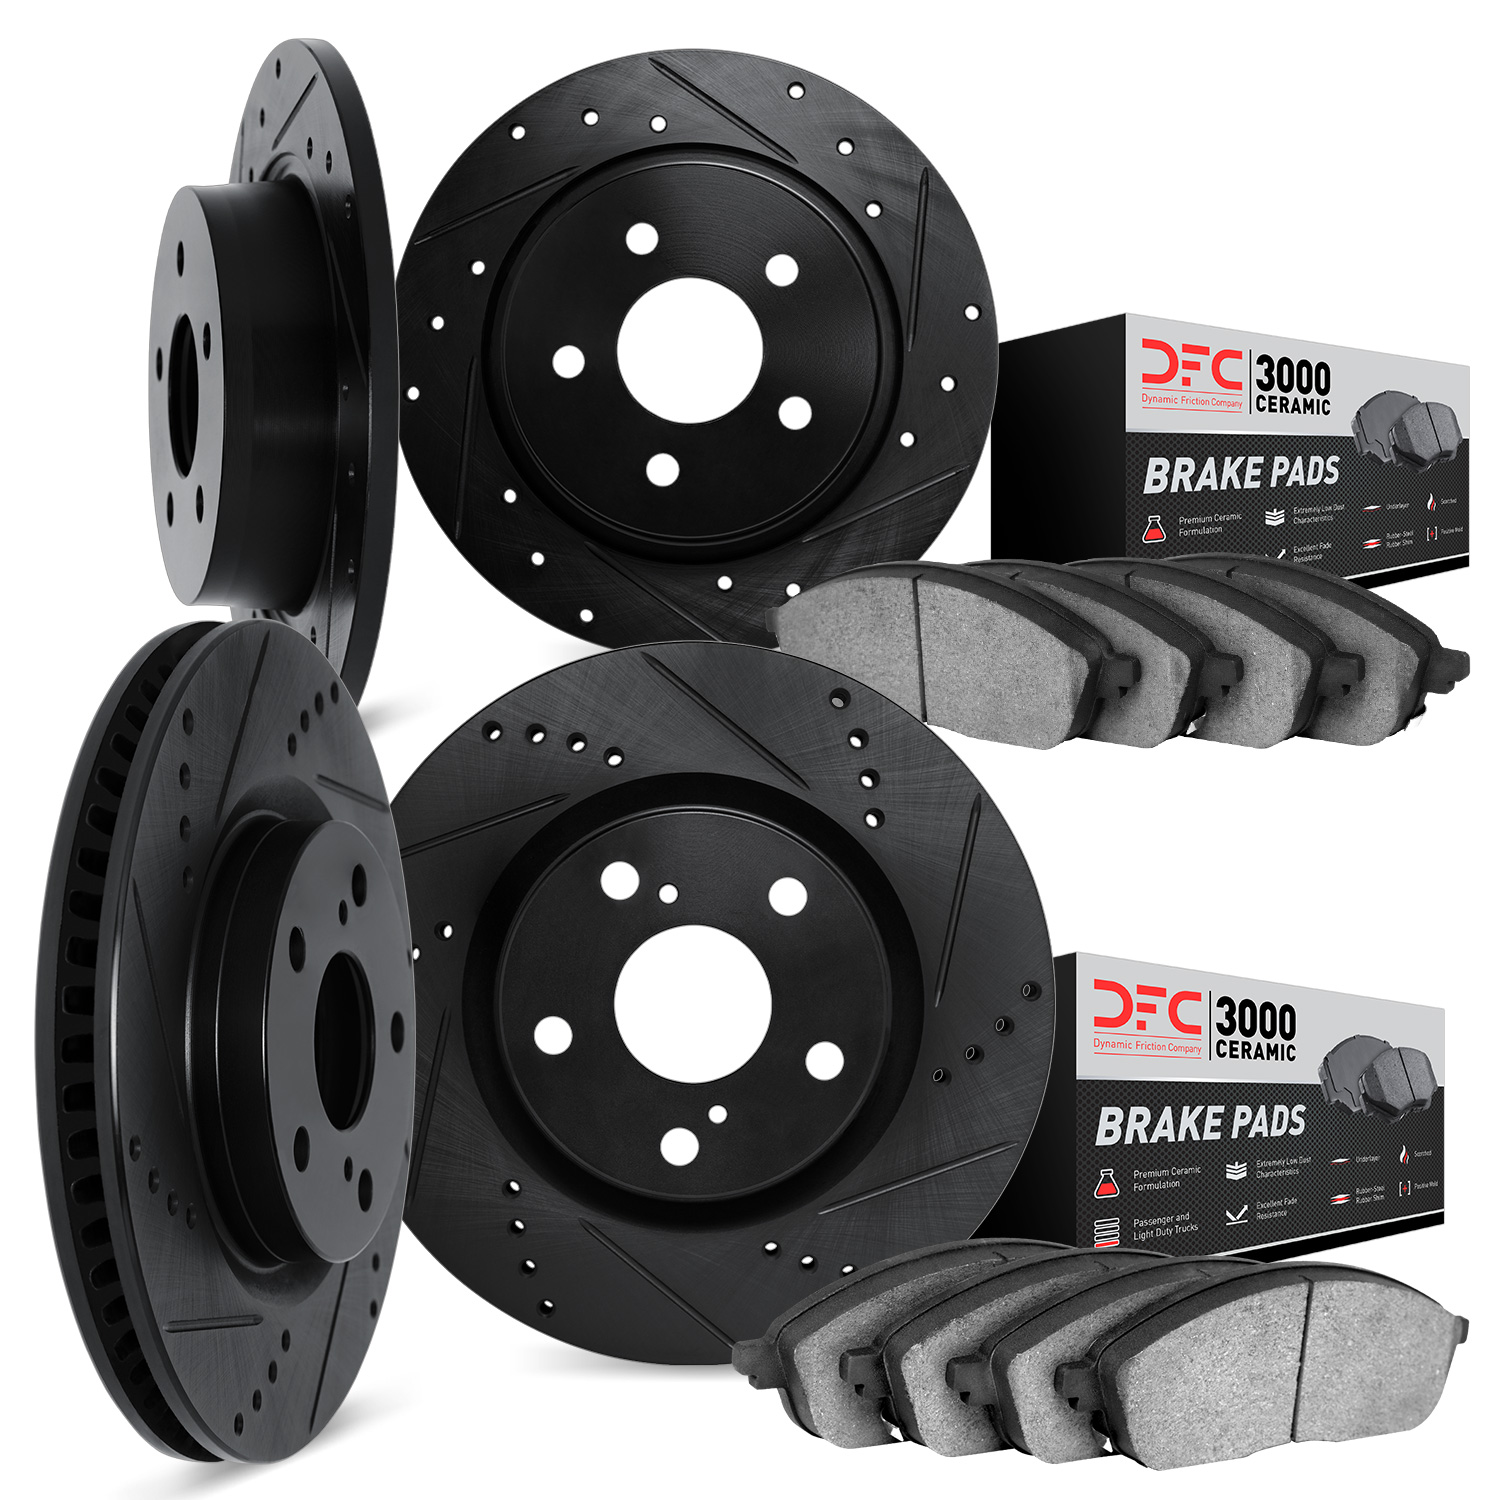 8304-59076 Drilled/Slotted Brake Rotors with 3000-Series Ceramic Brake Pads Kit [Black], 2013-2017 Acura/Honda, Position: Front